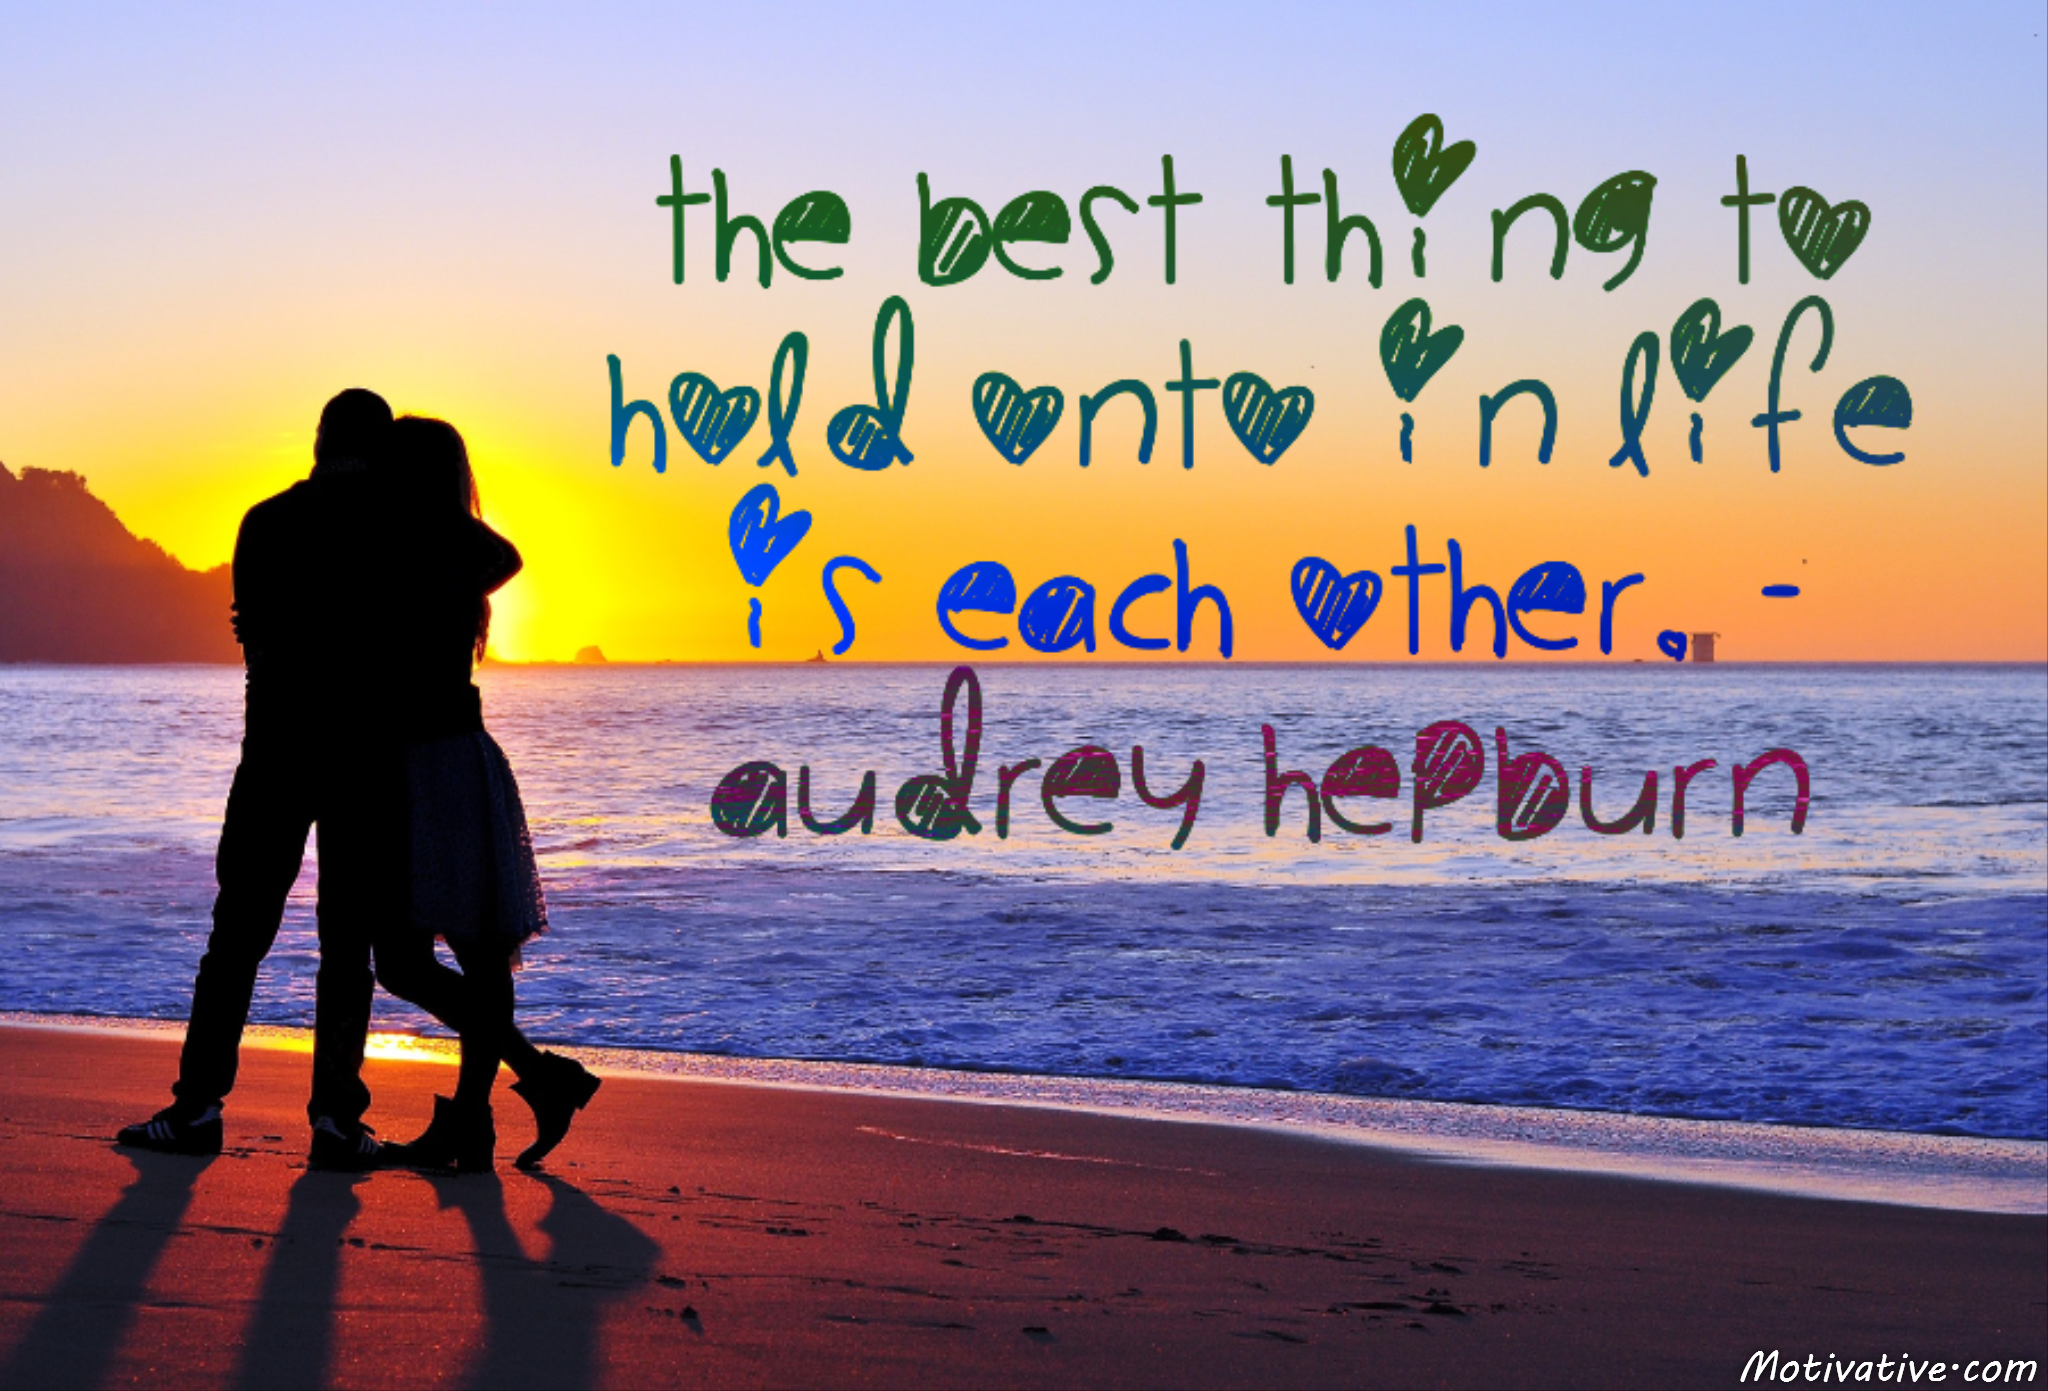 The best thing to hold onto in life is each other. – Audrey Hepburn